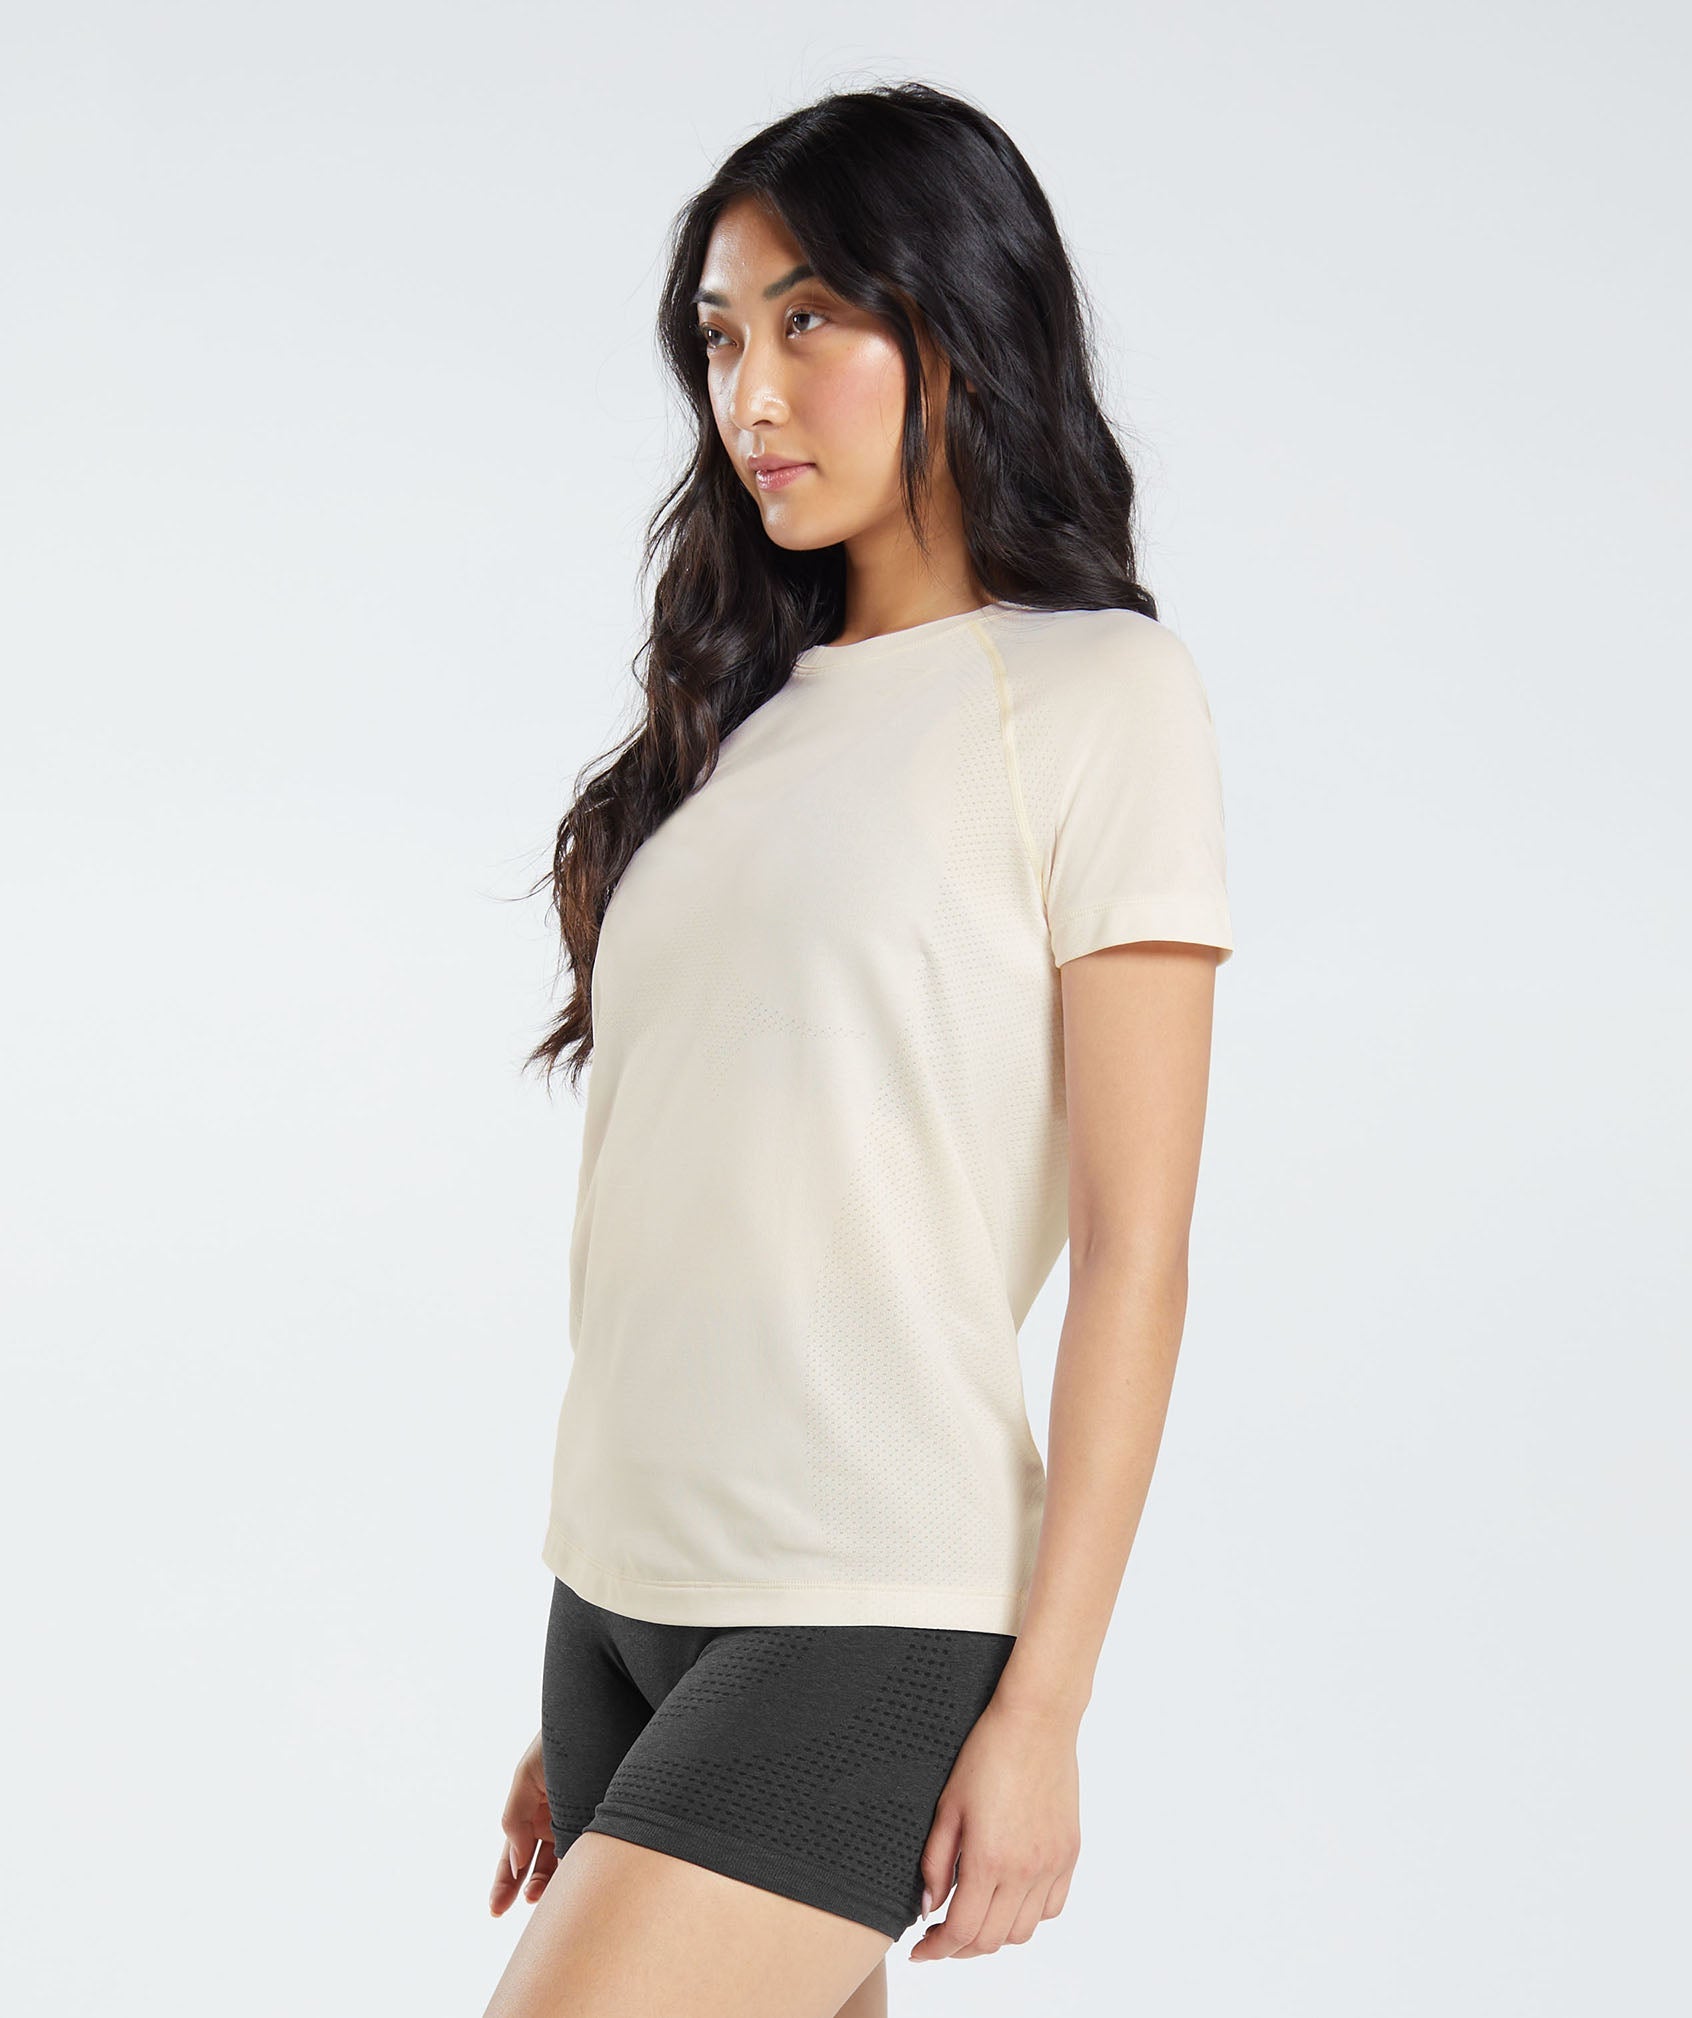 Vital Seamless 2.0 Light T-Shirt in Coconut White Marl - view 3